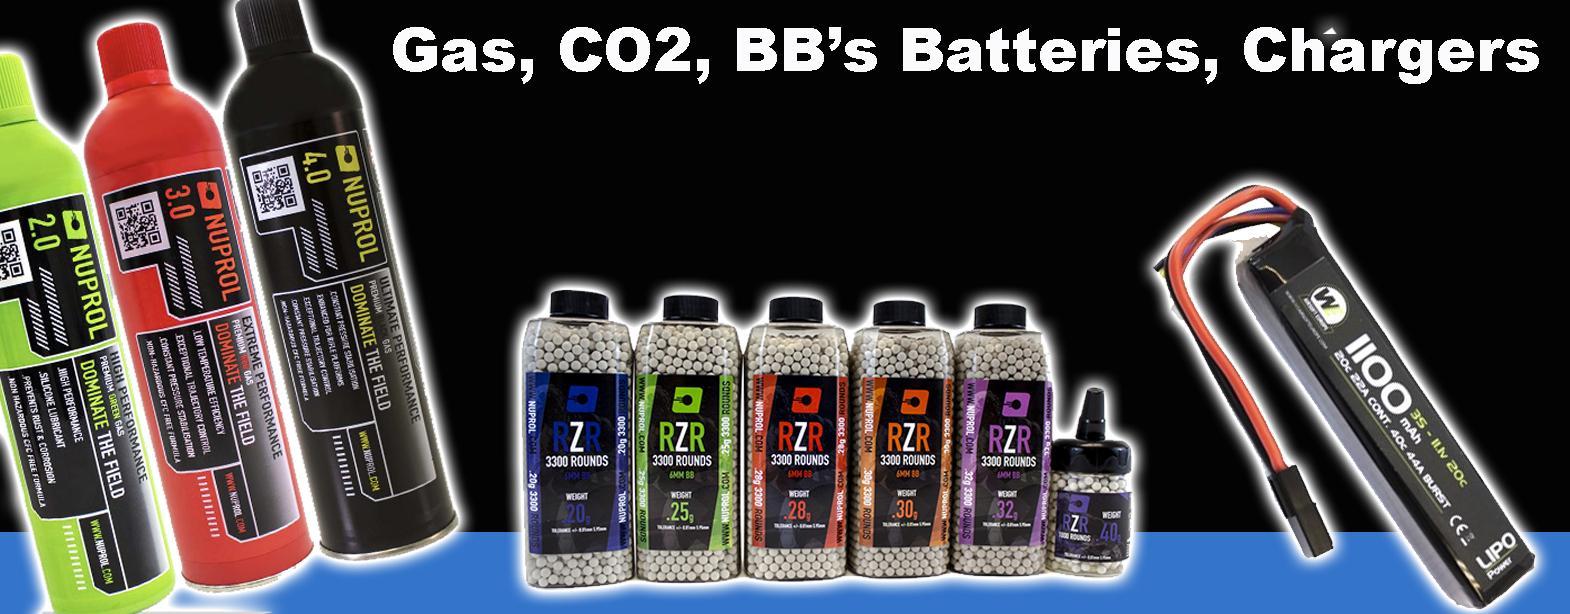 Gas, CO2, BBs, Batteries and Chargers